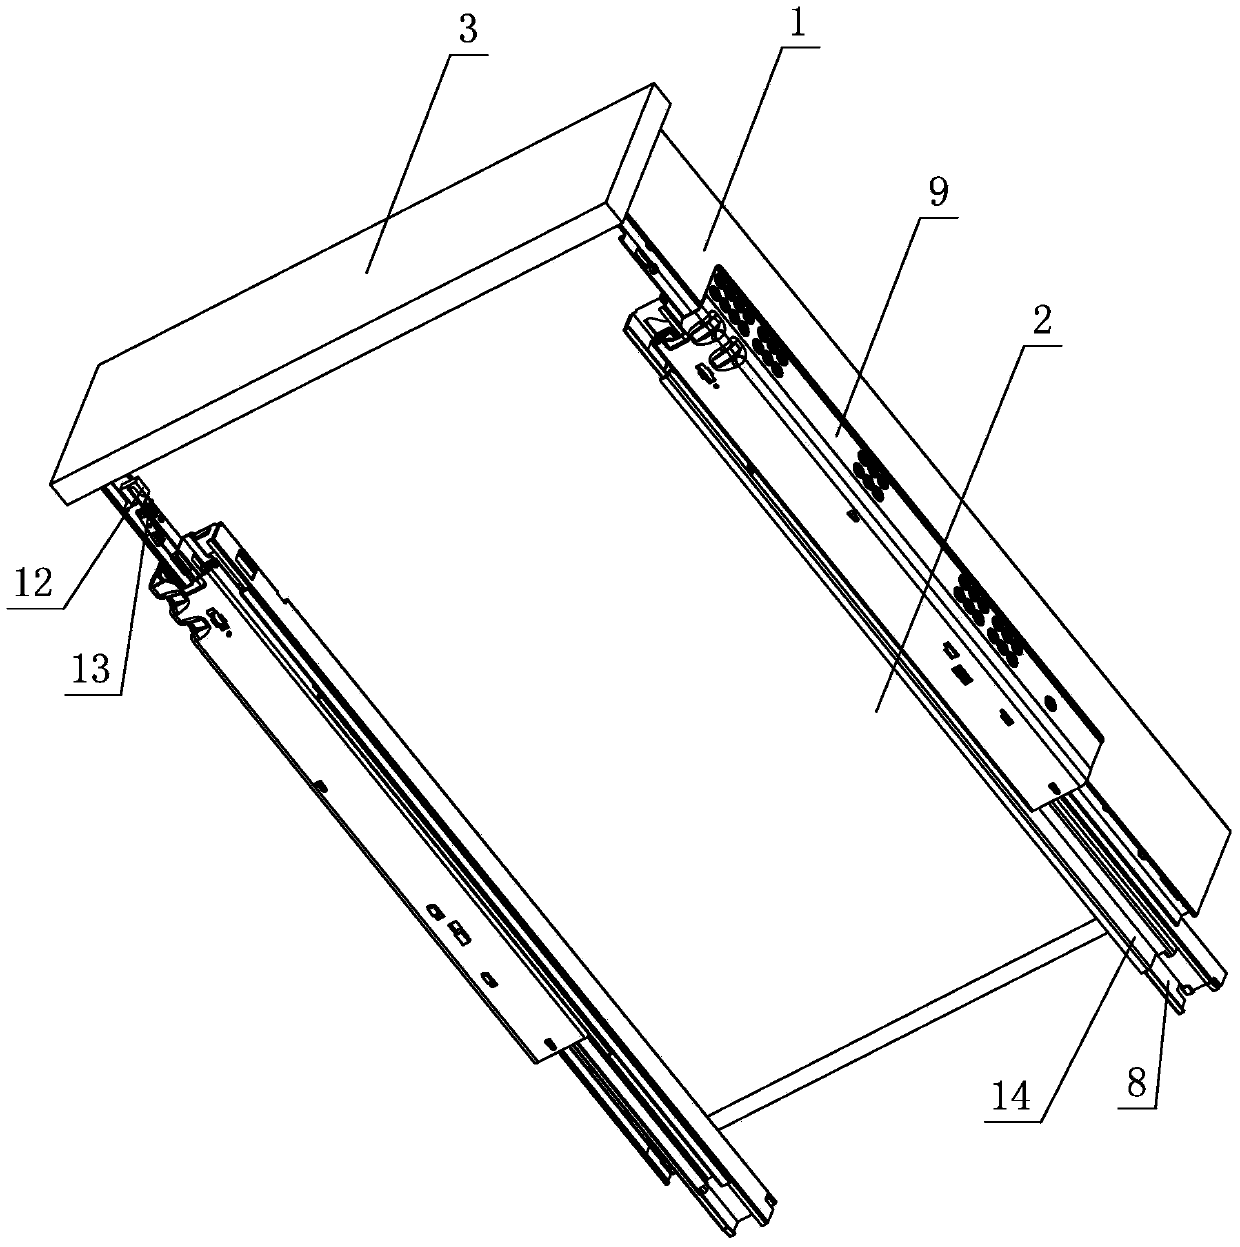 Metal side plate structure of drawer